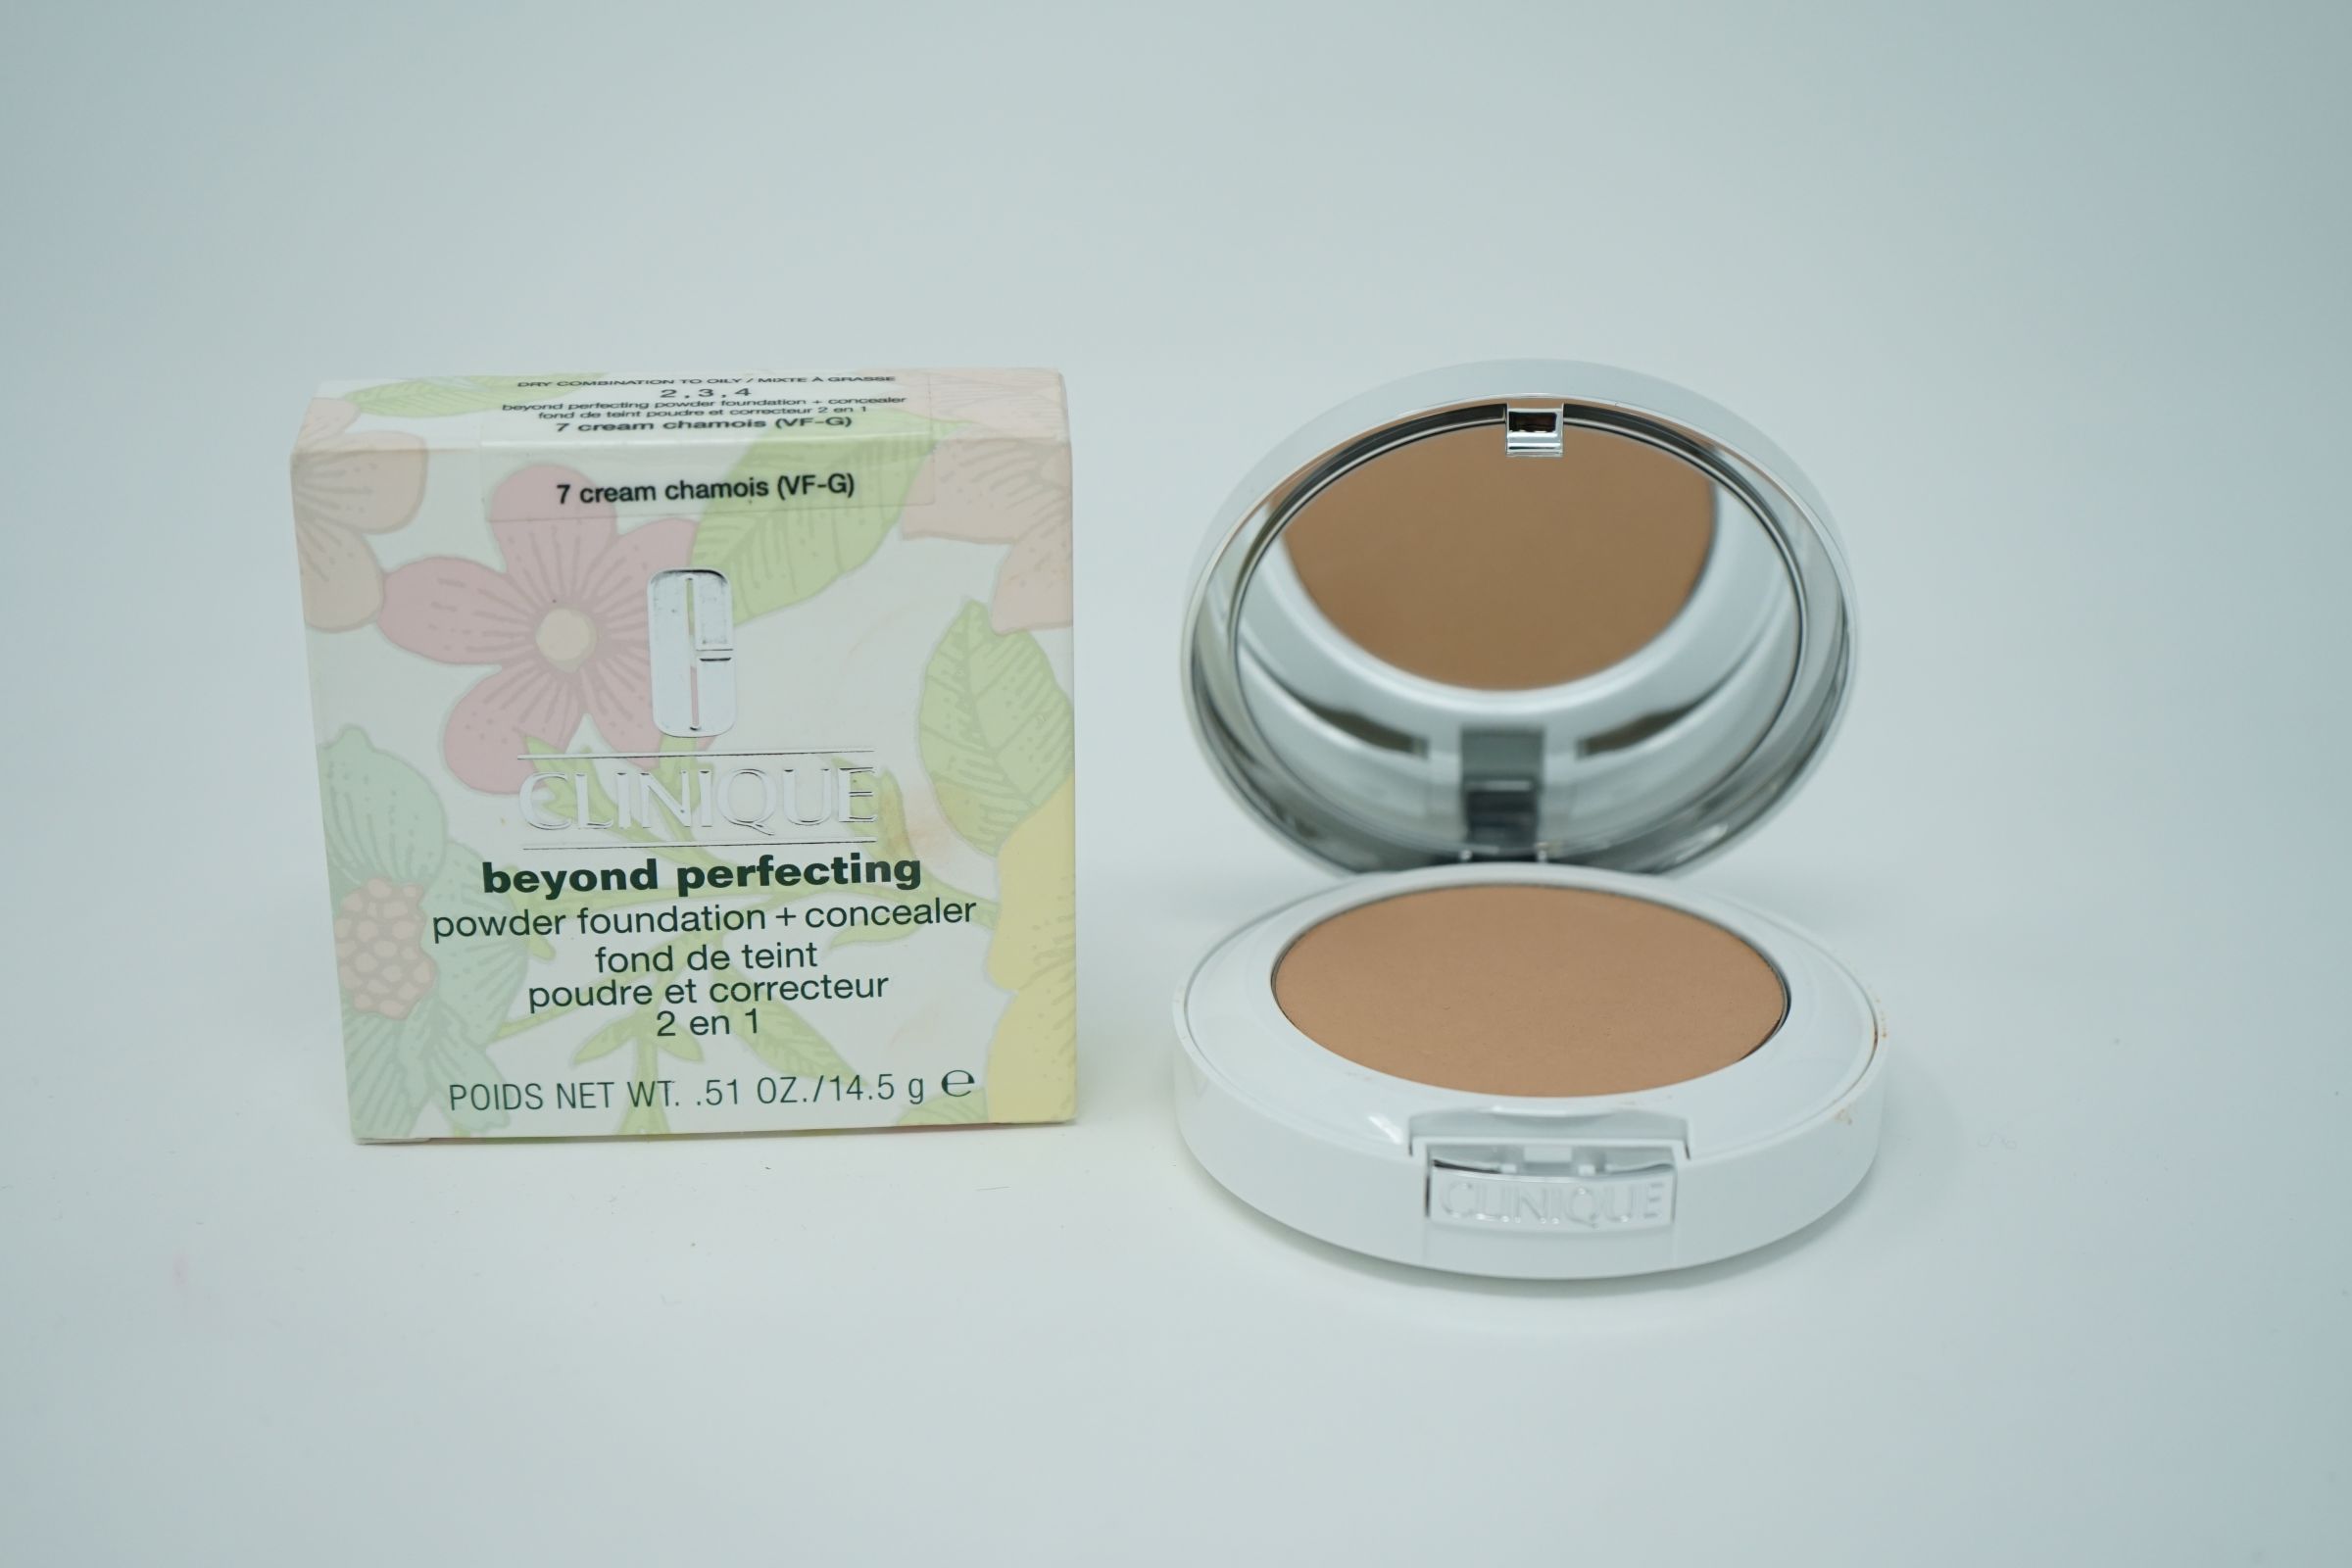 Clinique beyond perfecting powder foundation + concealer 7 cream chamois (VF-G)